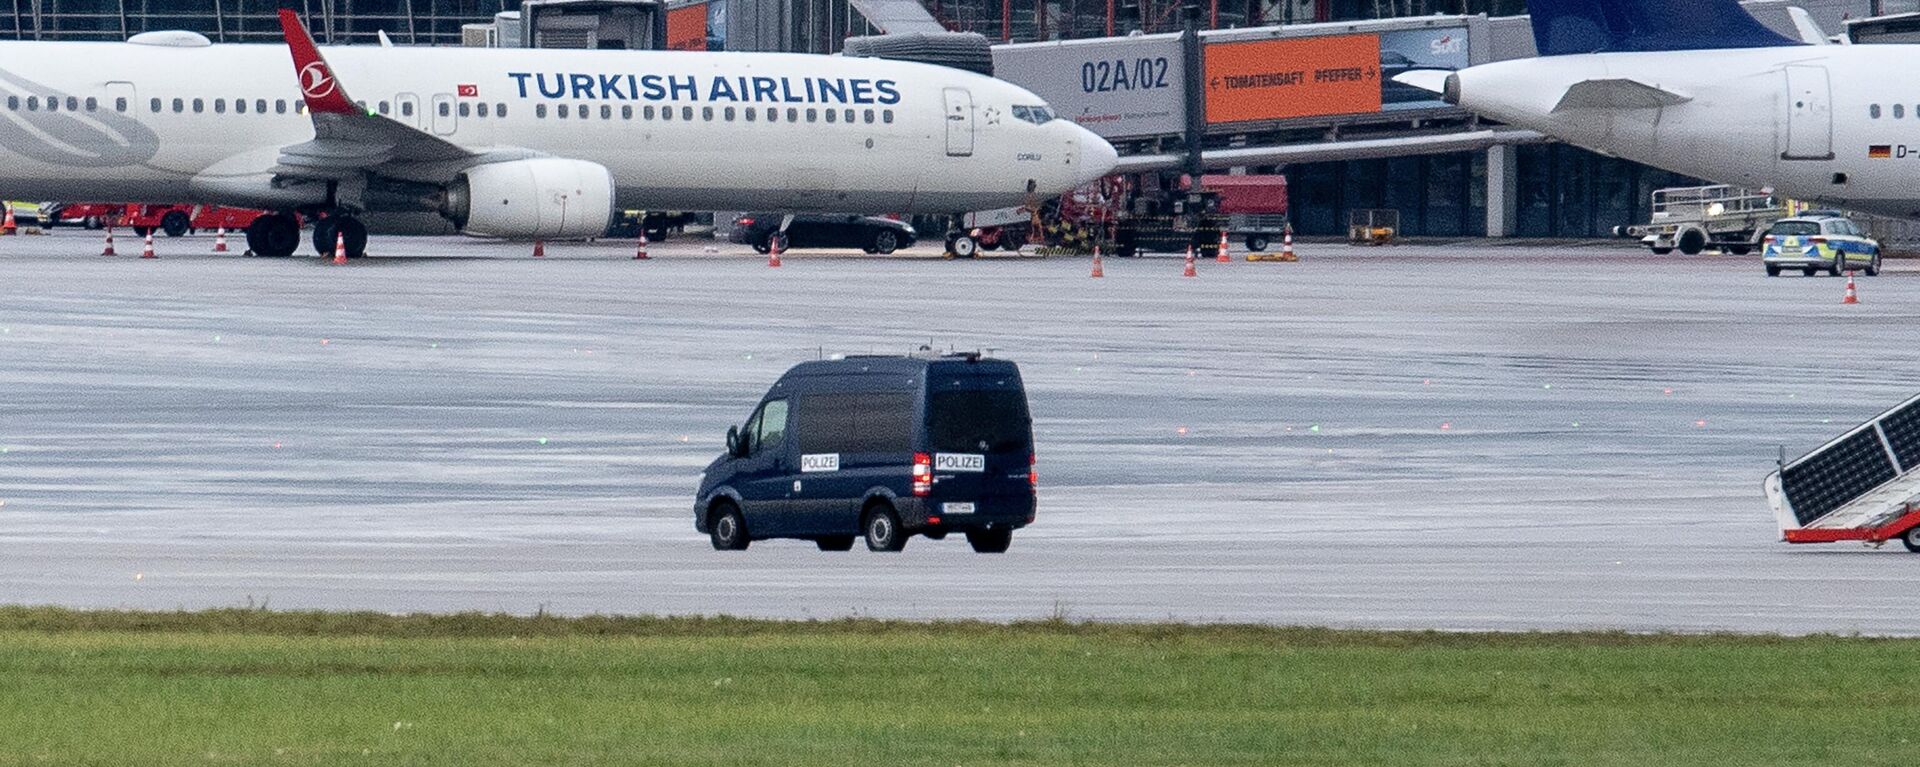 A police van observe the car of a hostage taker seen parked under a Turkish airline plane on the tarmac at the airport in Hamburg, northern Germany on November 5 - Sputnik International, 1920, 05.11.2023